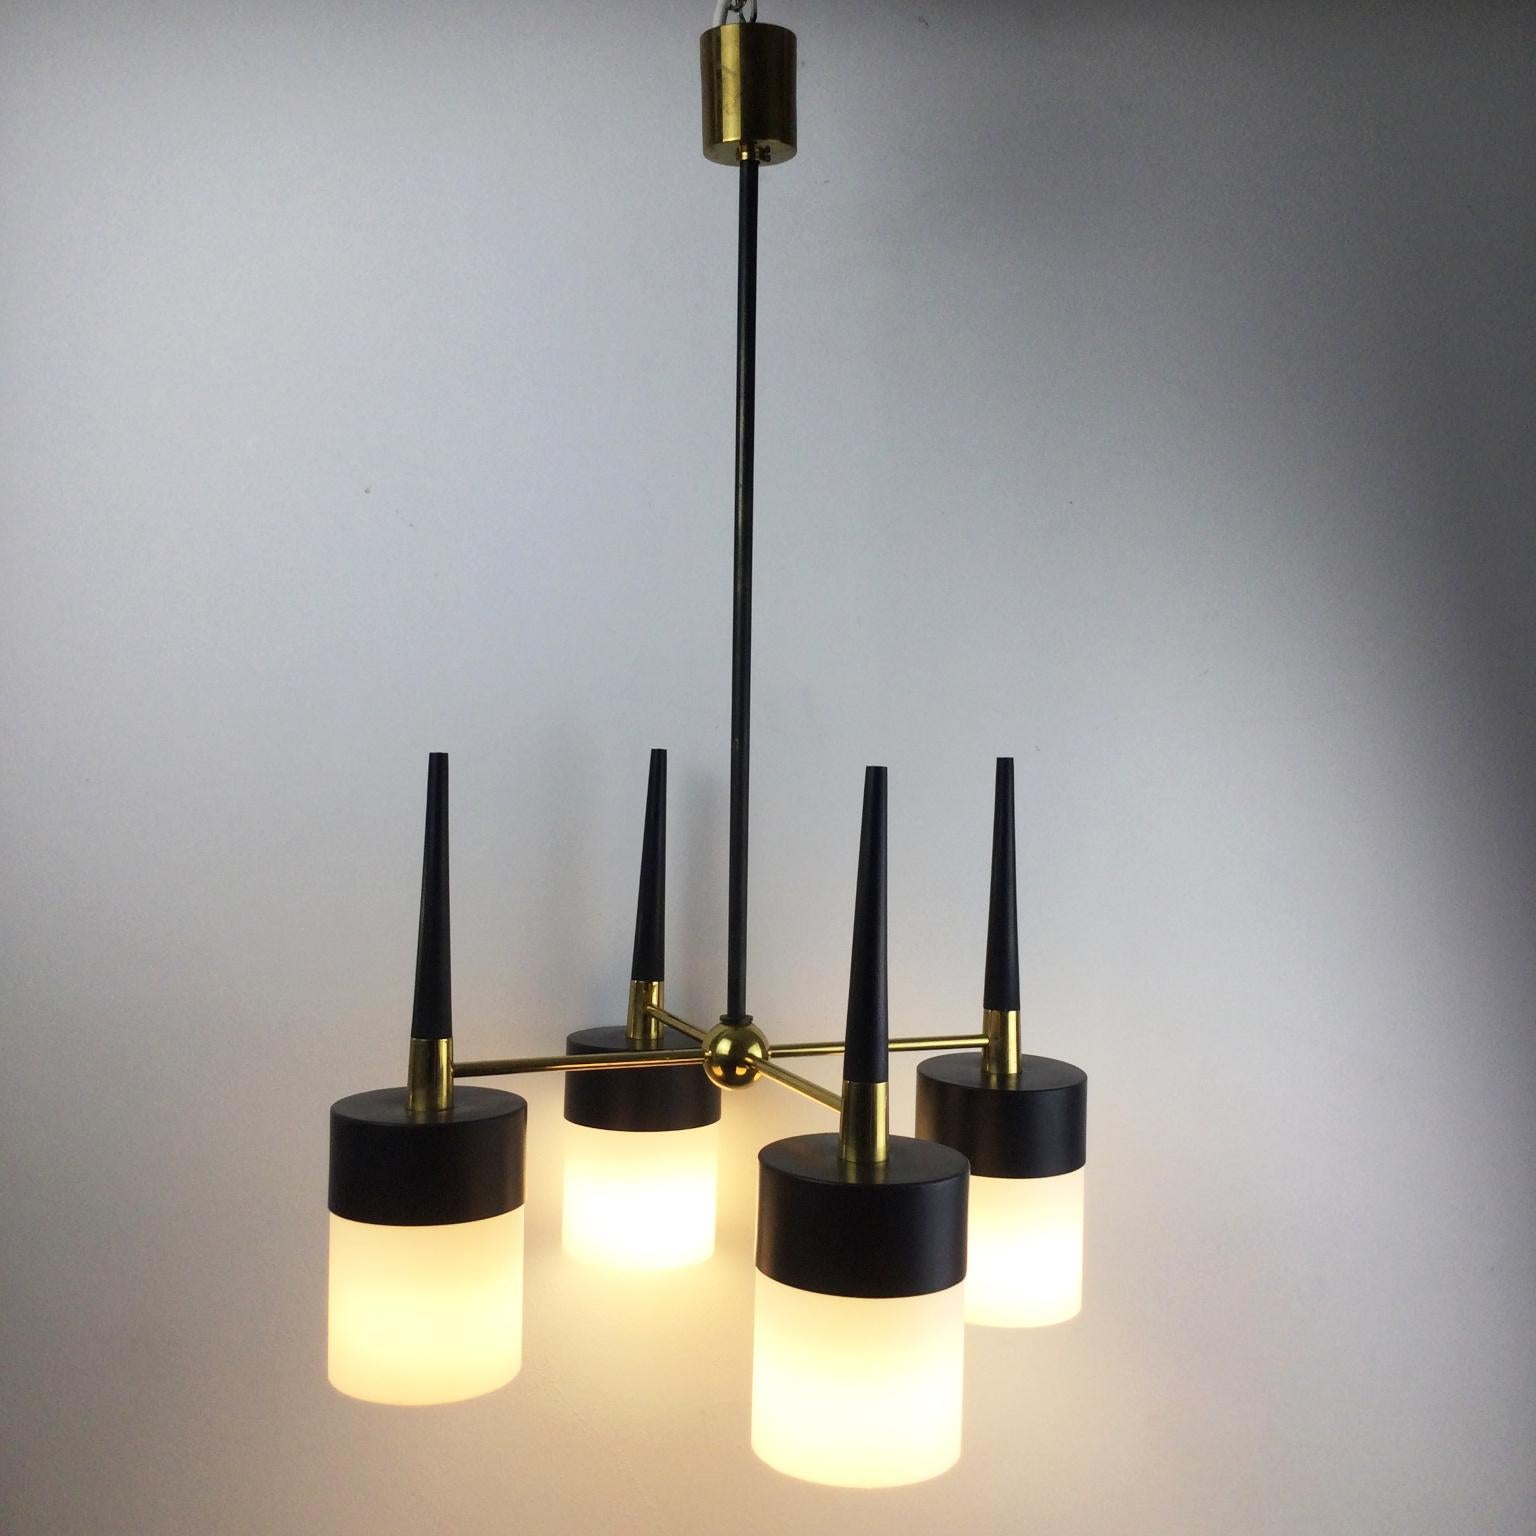 French 1950s Arlus Ceiling Light with Four Opalines Glass Shade and Brass Finish